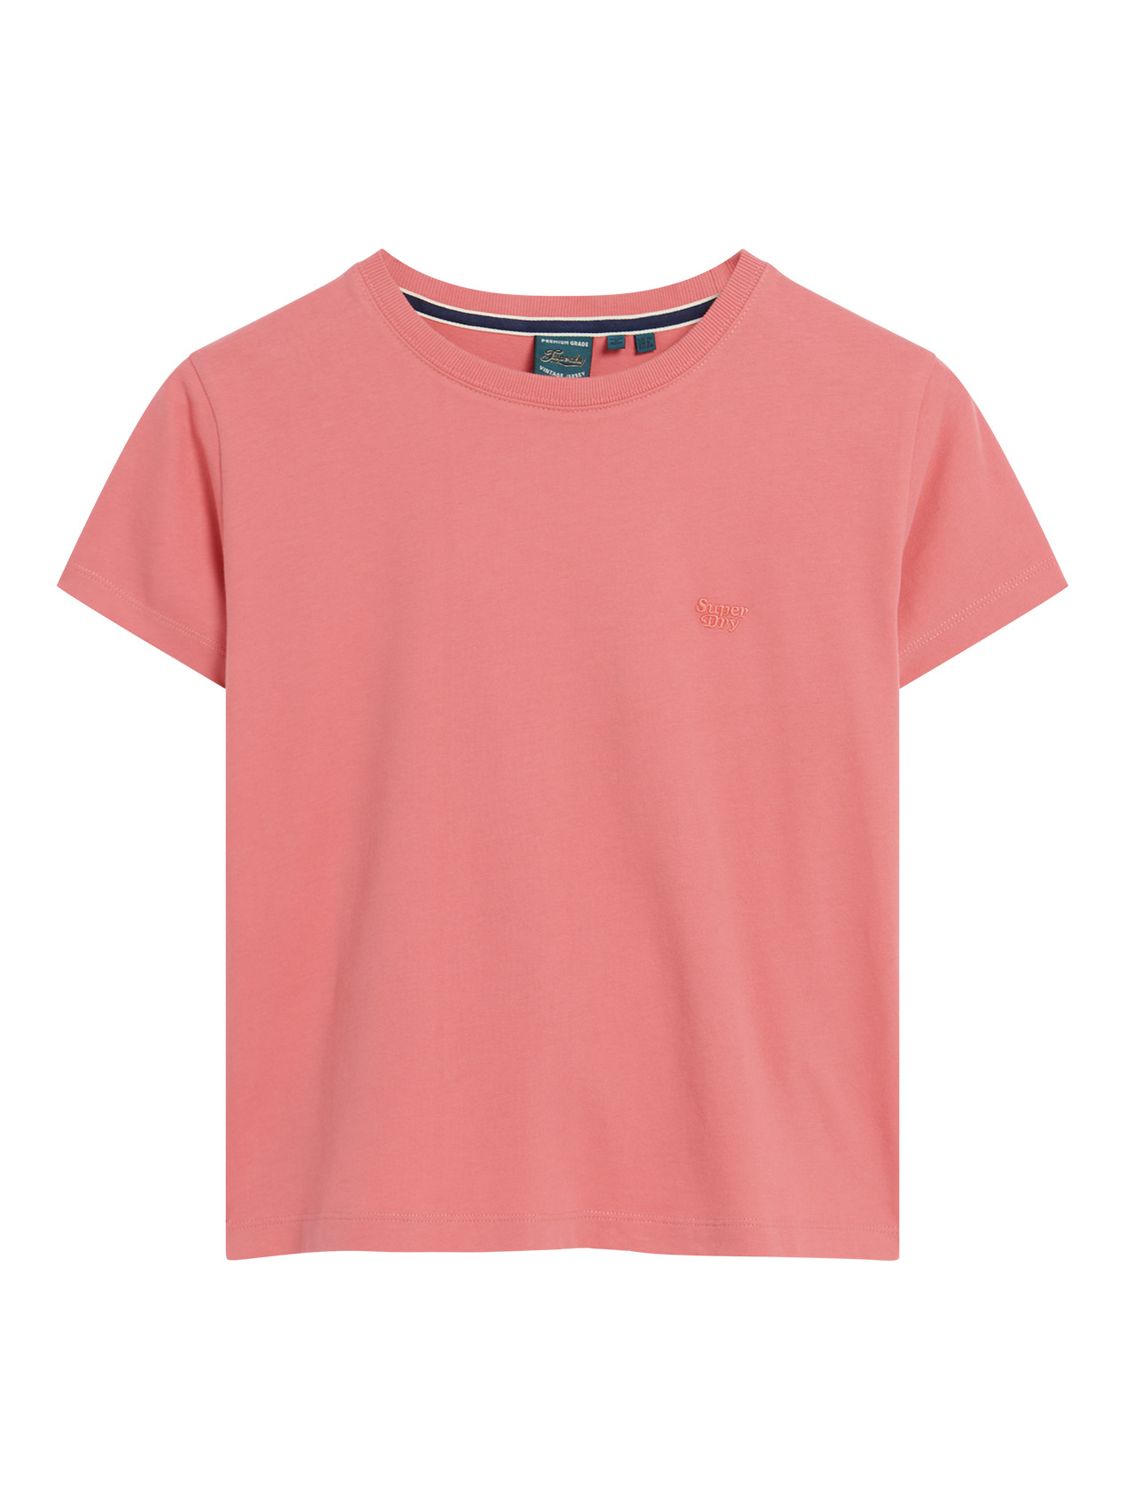 Superdry Essential Logo 90s T-Shirt, Camping Pink at John Lewis & Partners